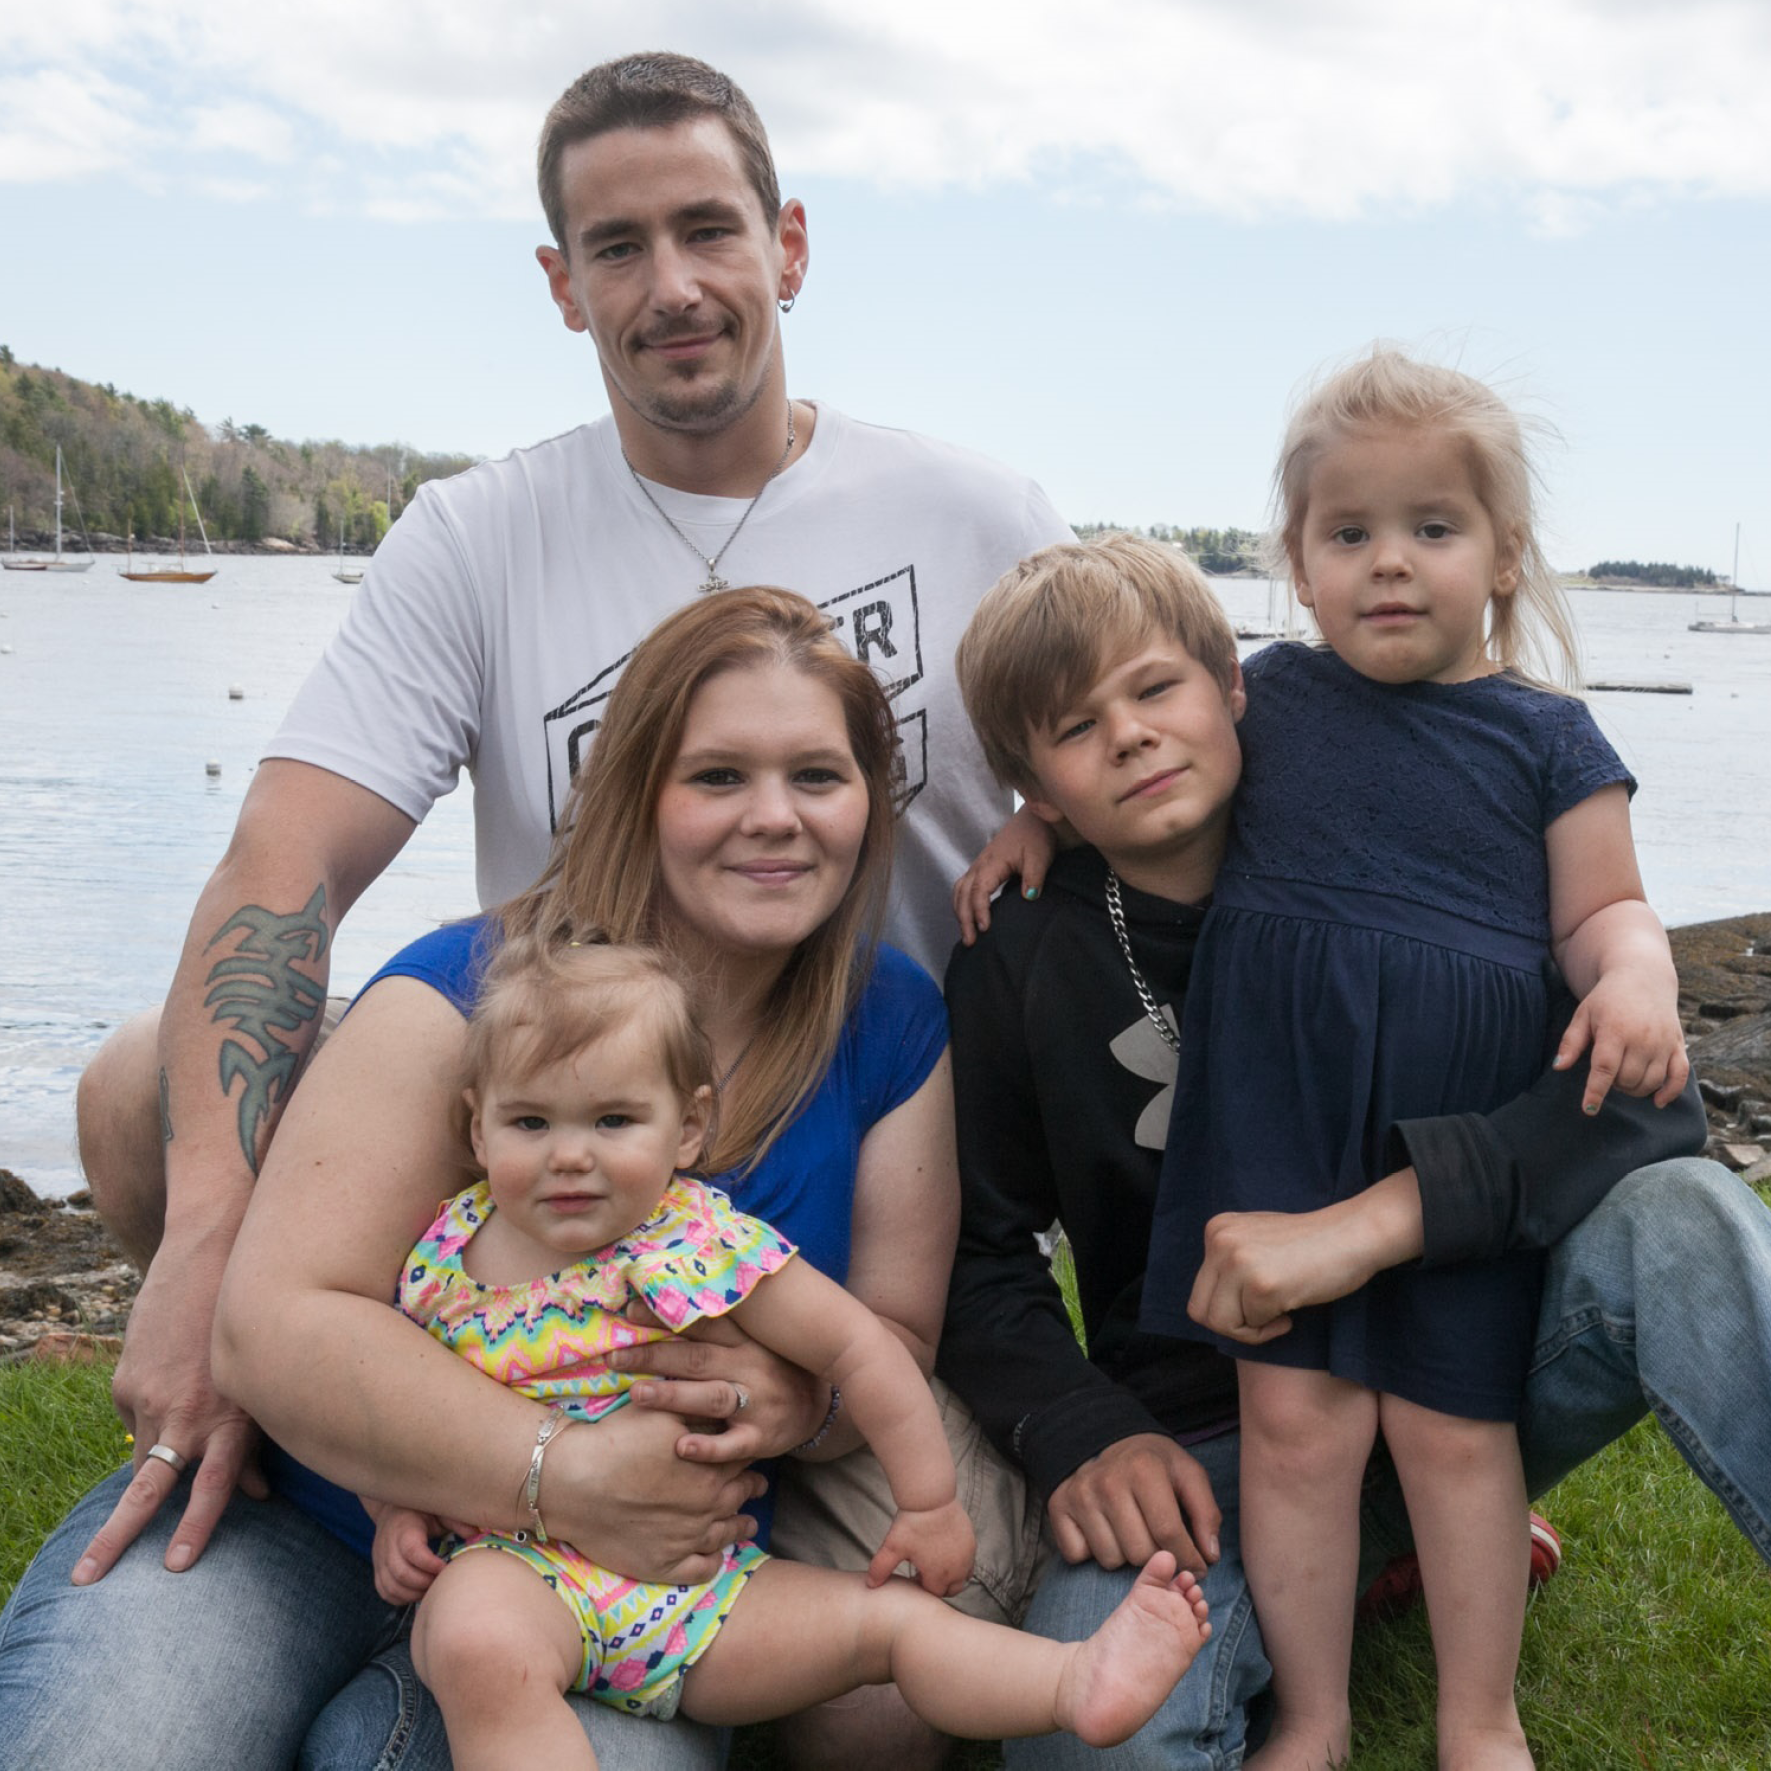 A young family poses by the shoreline in a coastal Maine community.